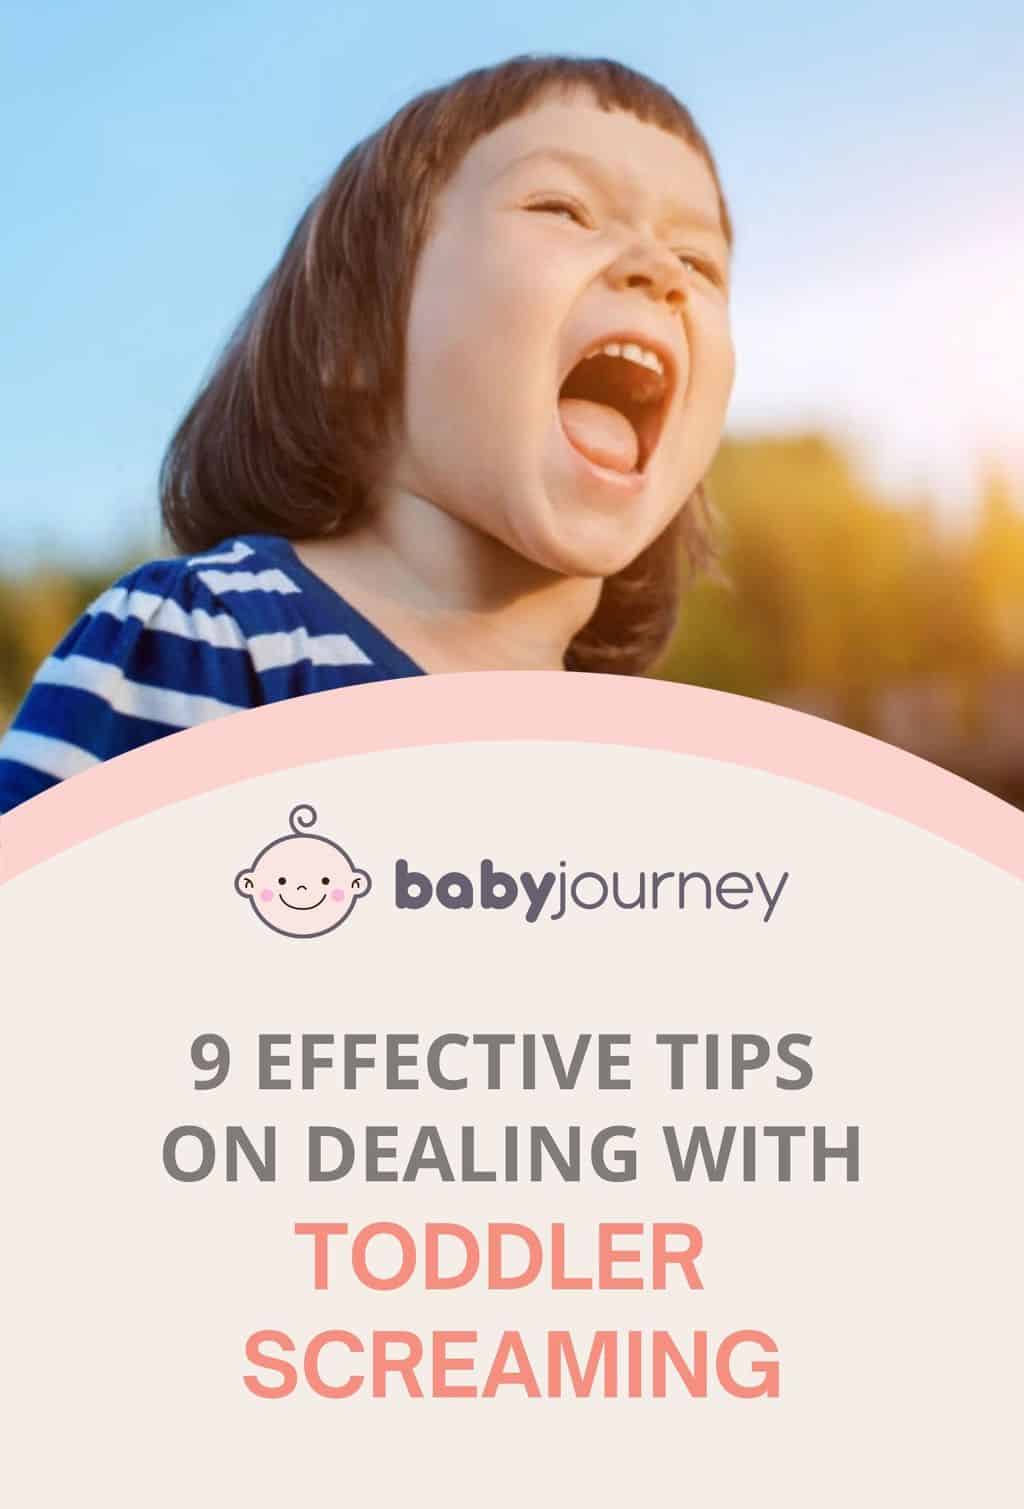 9 Effective Tips On Dealing With Toddler Screaming